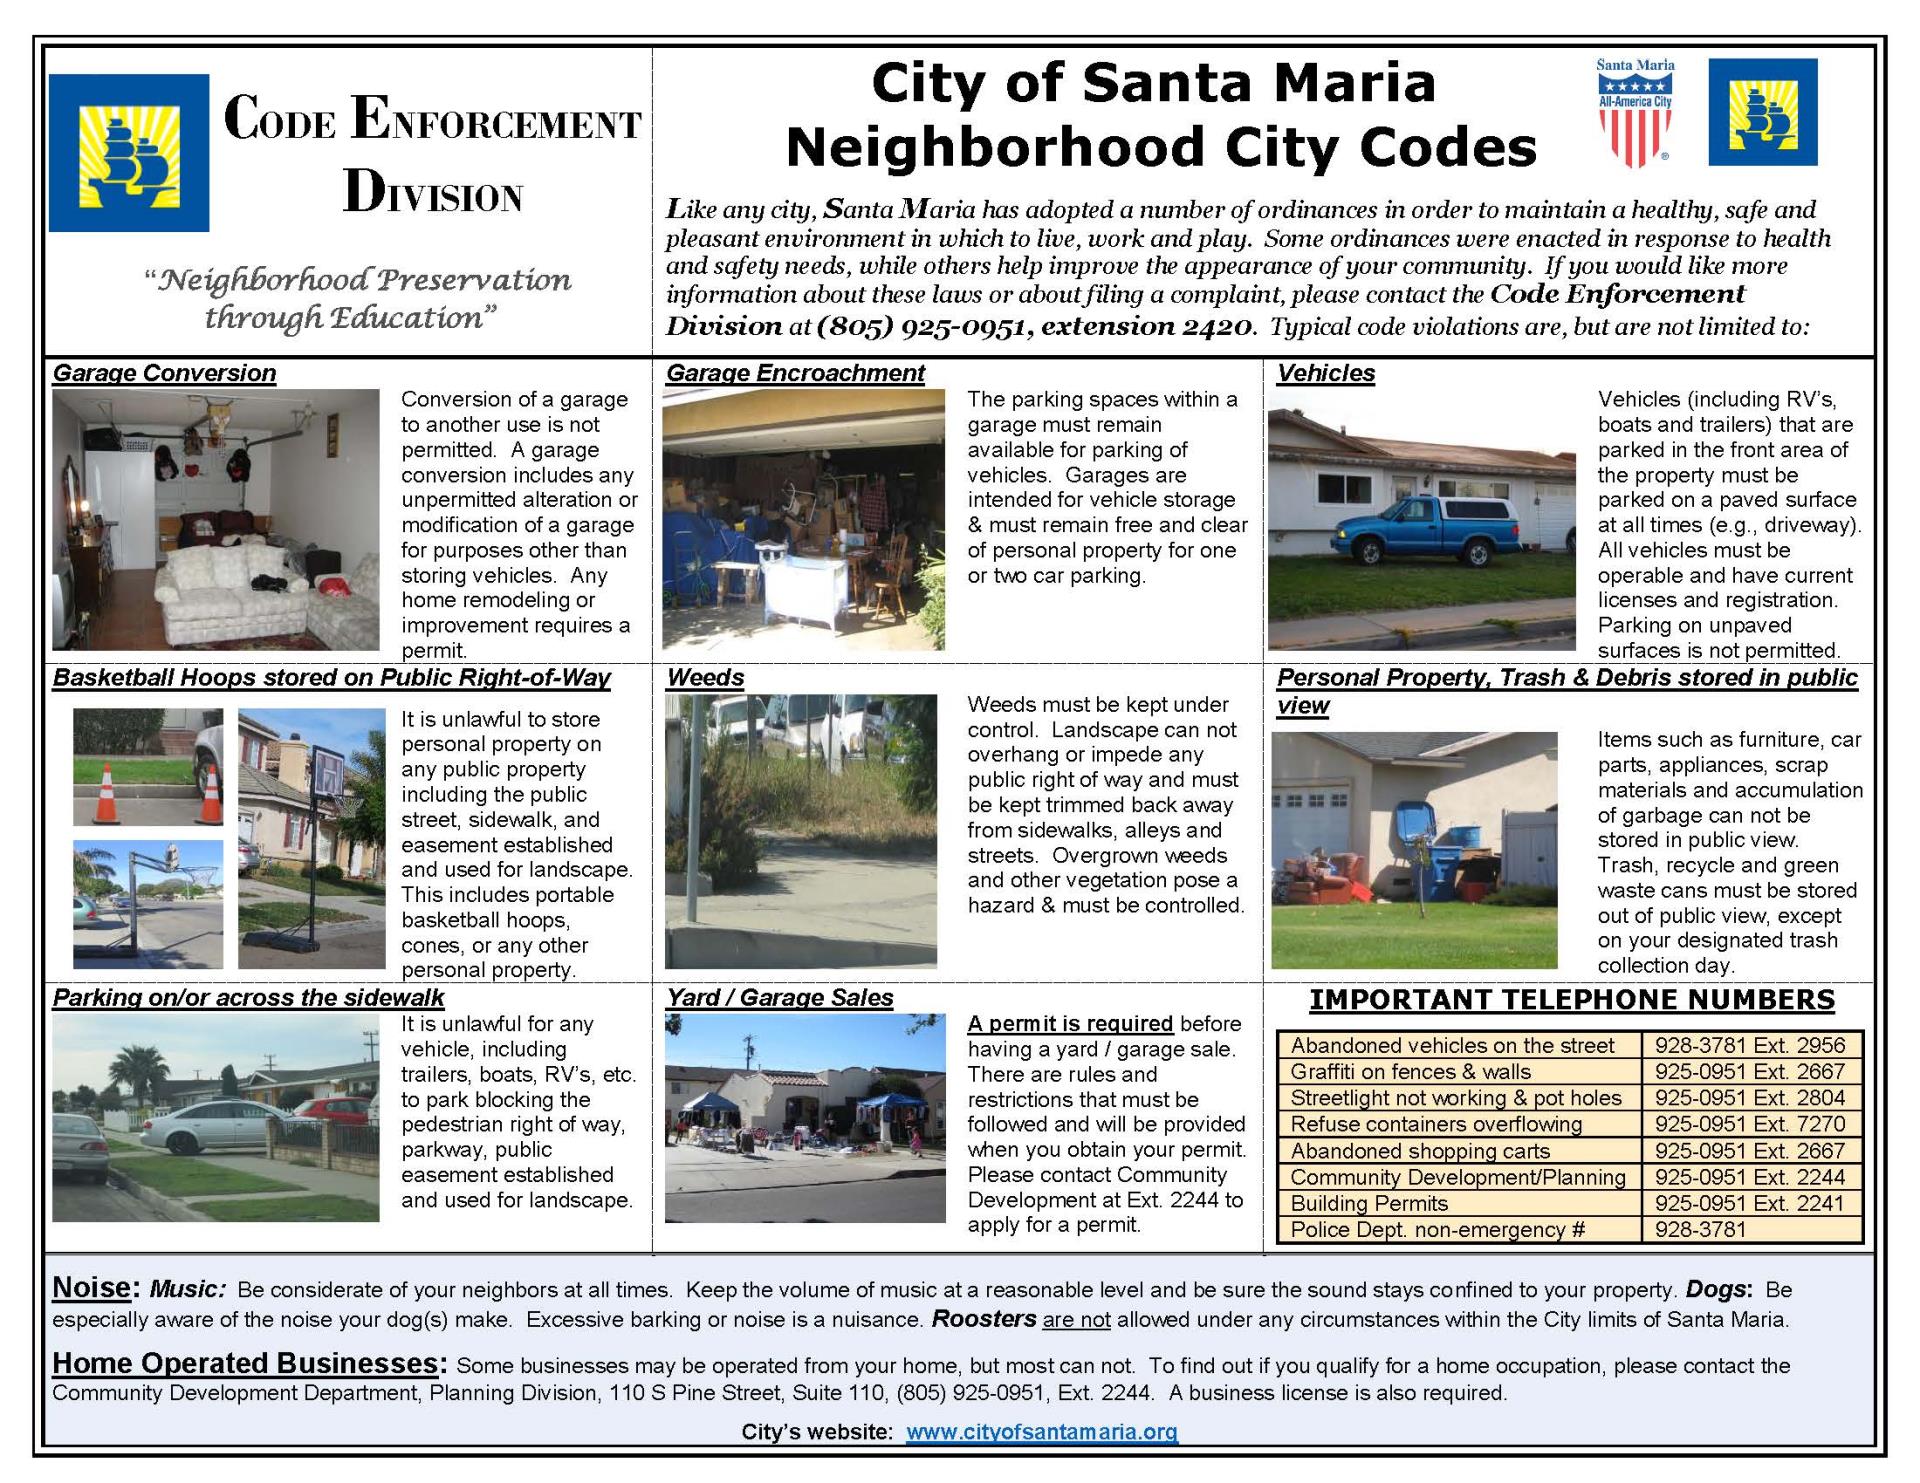 Graphic of Neighborhood city codes showing 8 most common offenses, Important telephone numbers are listed: abandonded vehicles hotline is 928-3781 ext. 2956, graffiti hotline is 925-0951 ext. 2667